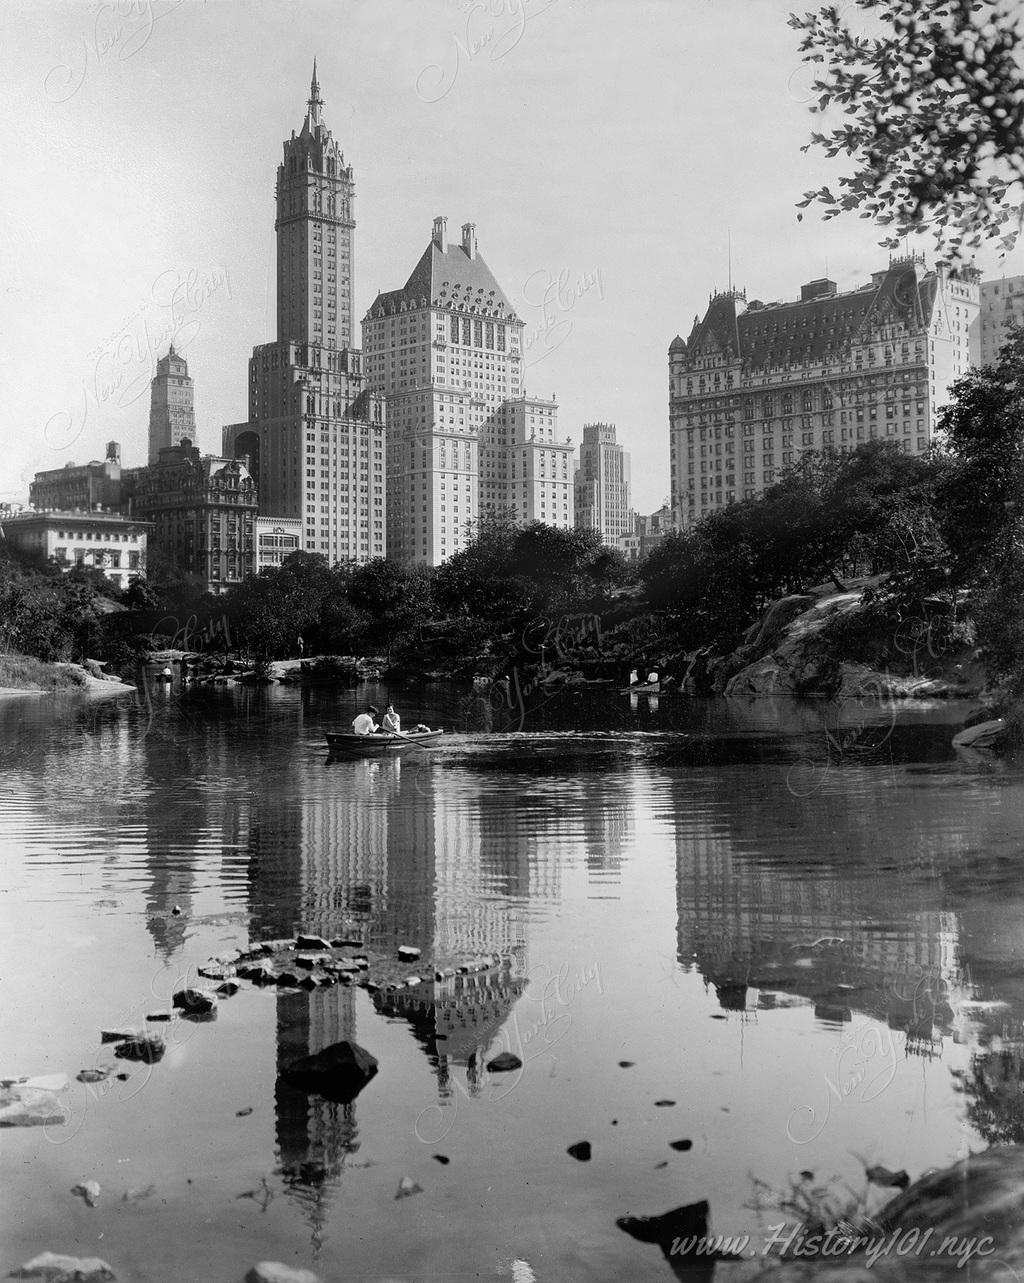 A photograph shot from the perspective of the lake at Central Park towards the luxury hotels which form the skyline.